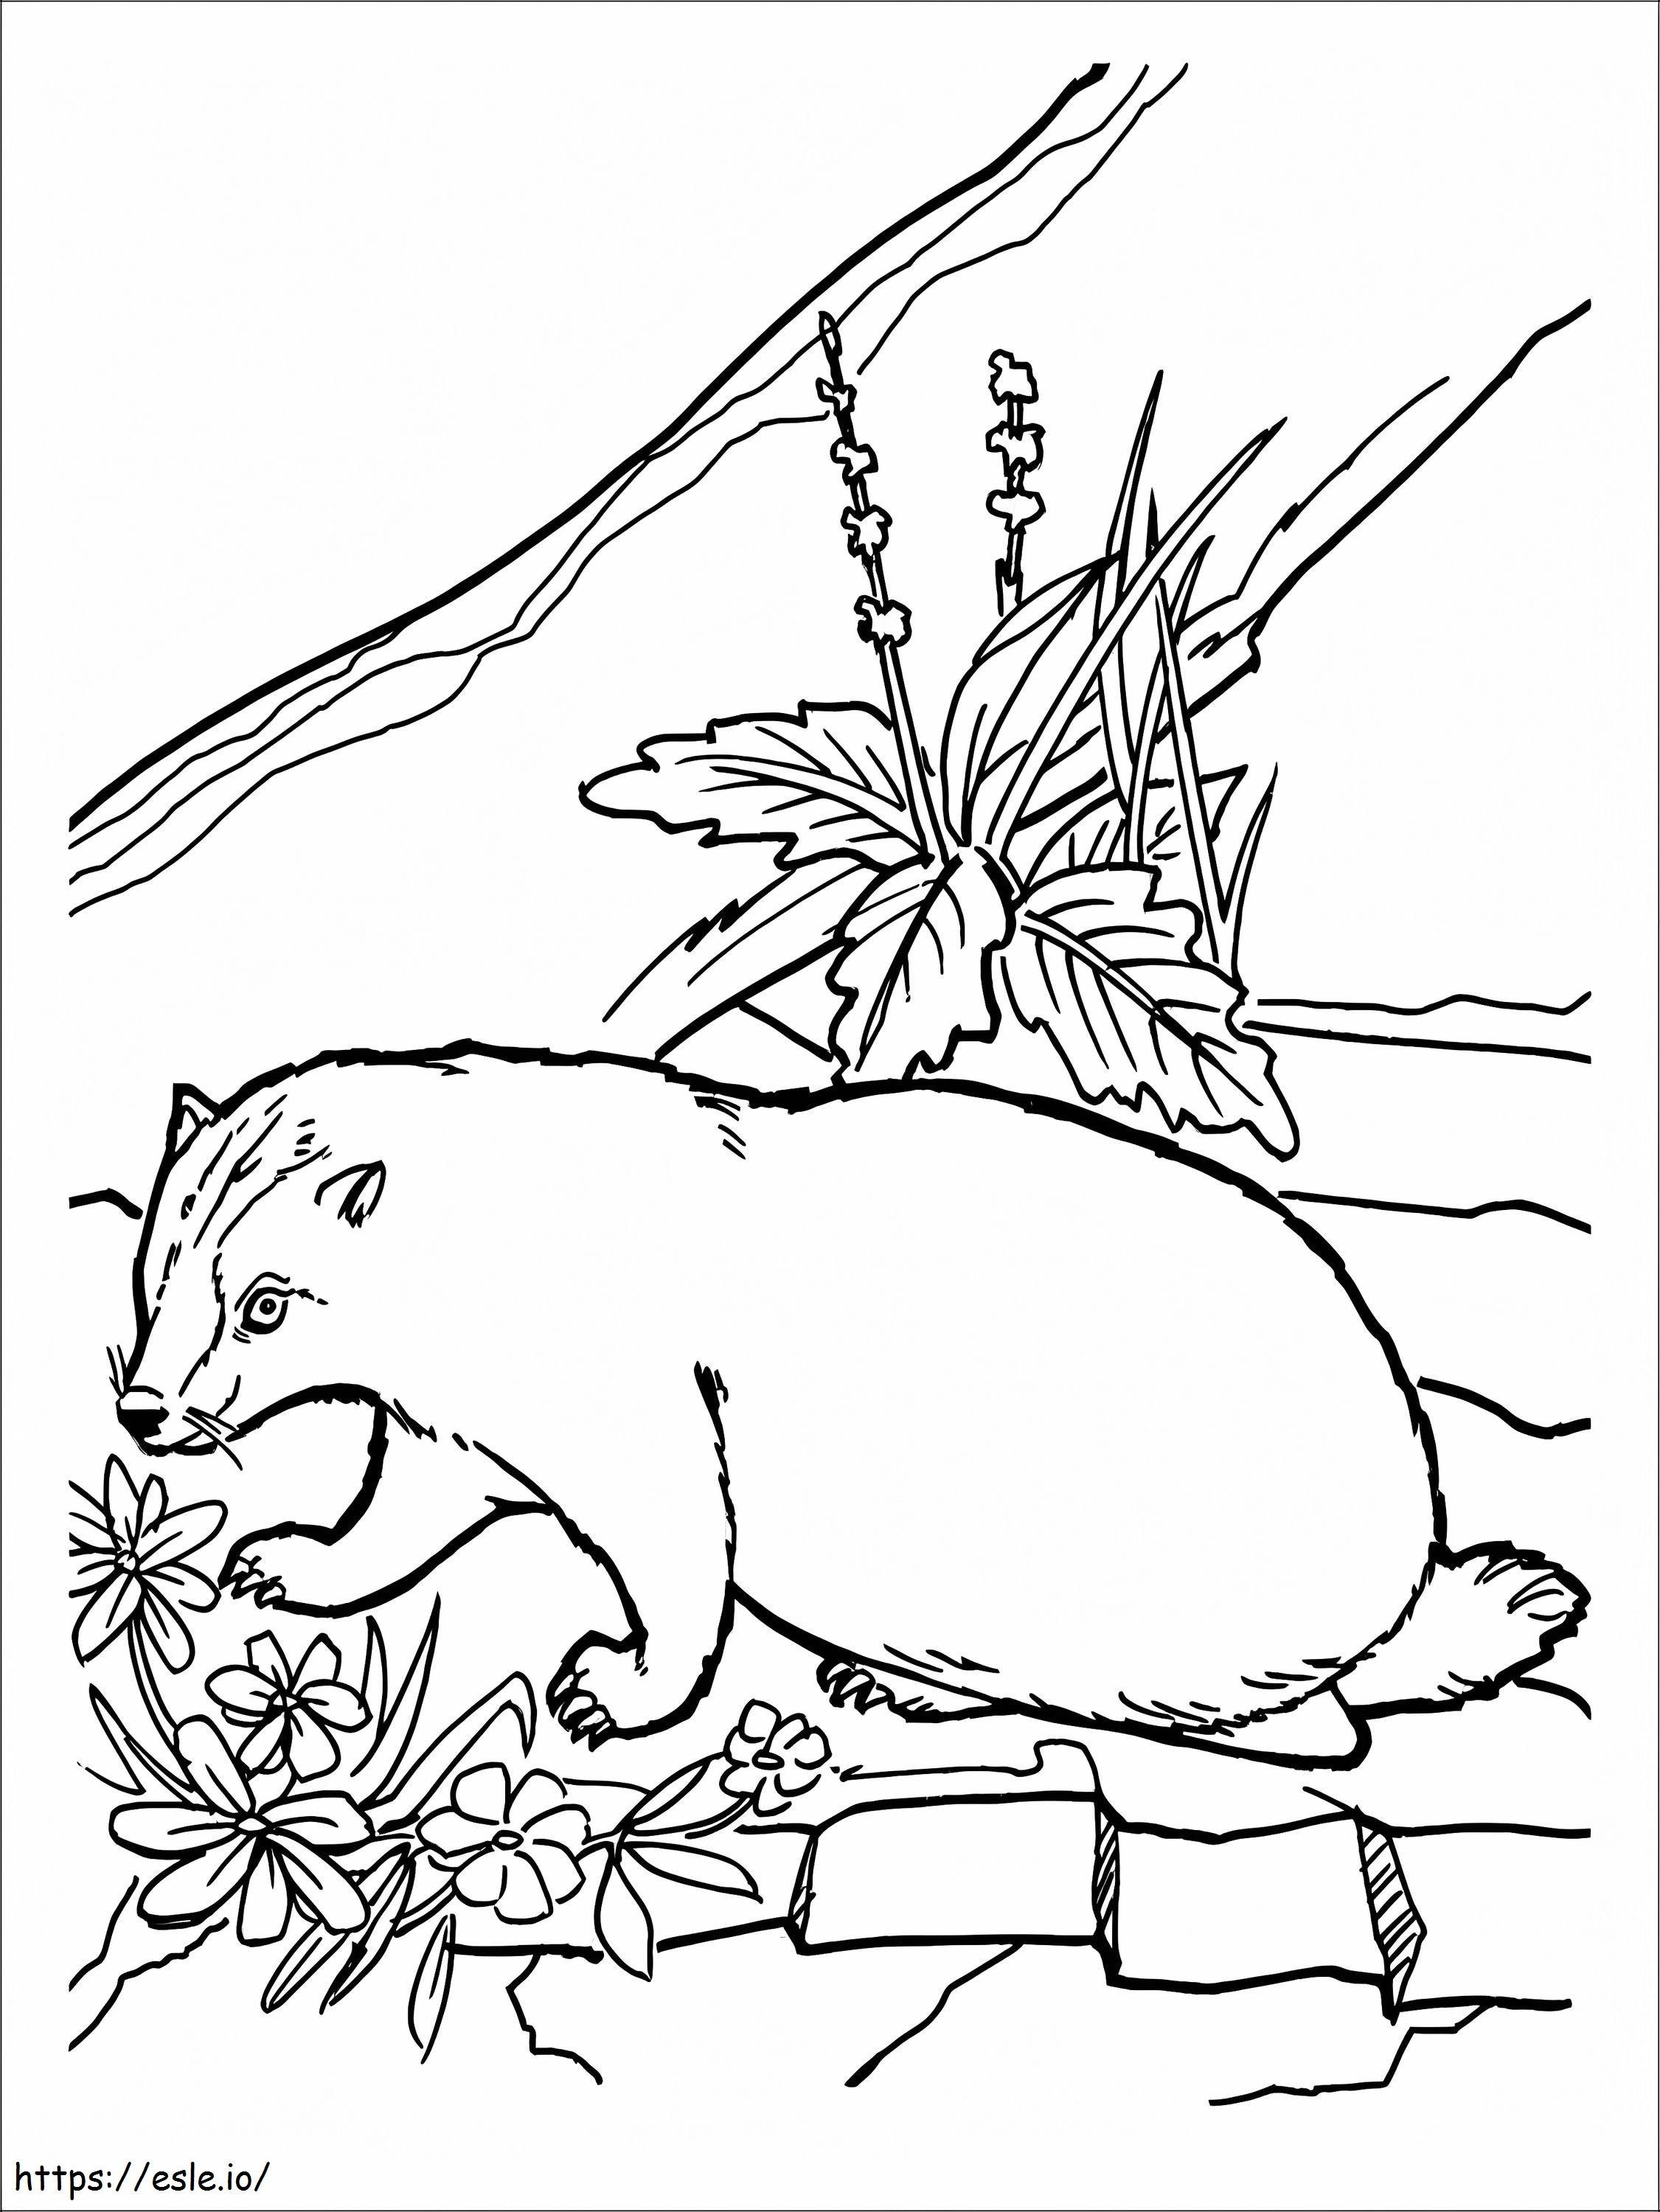 Badger And Flowers coloring page